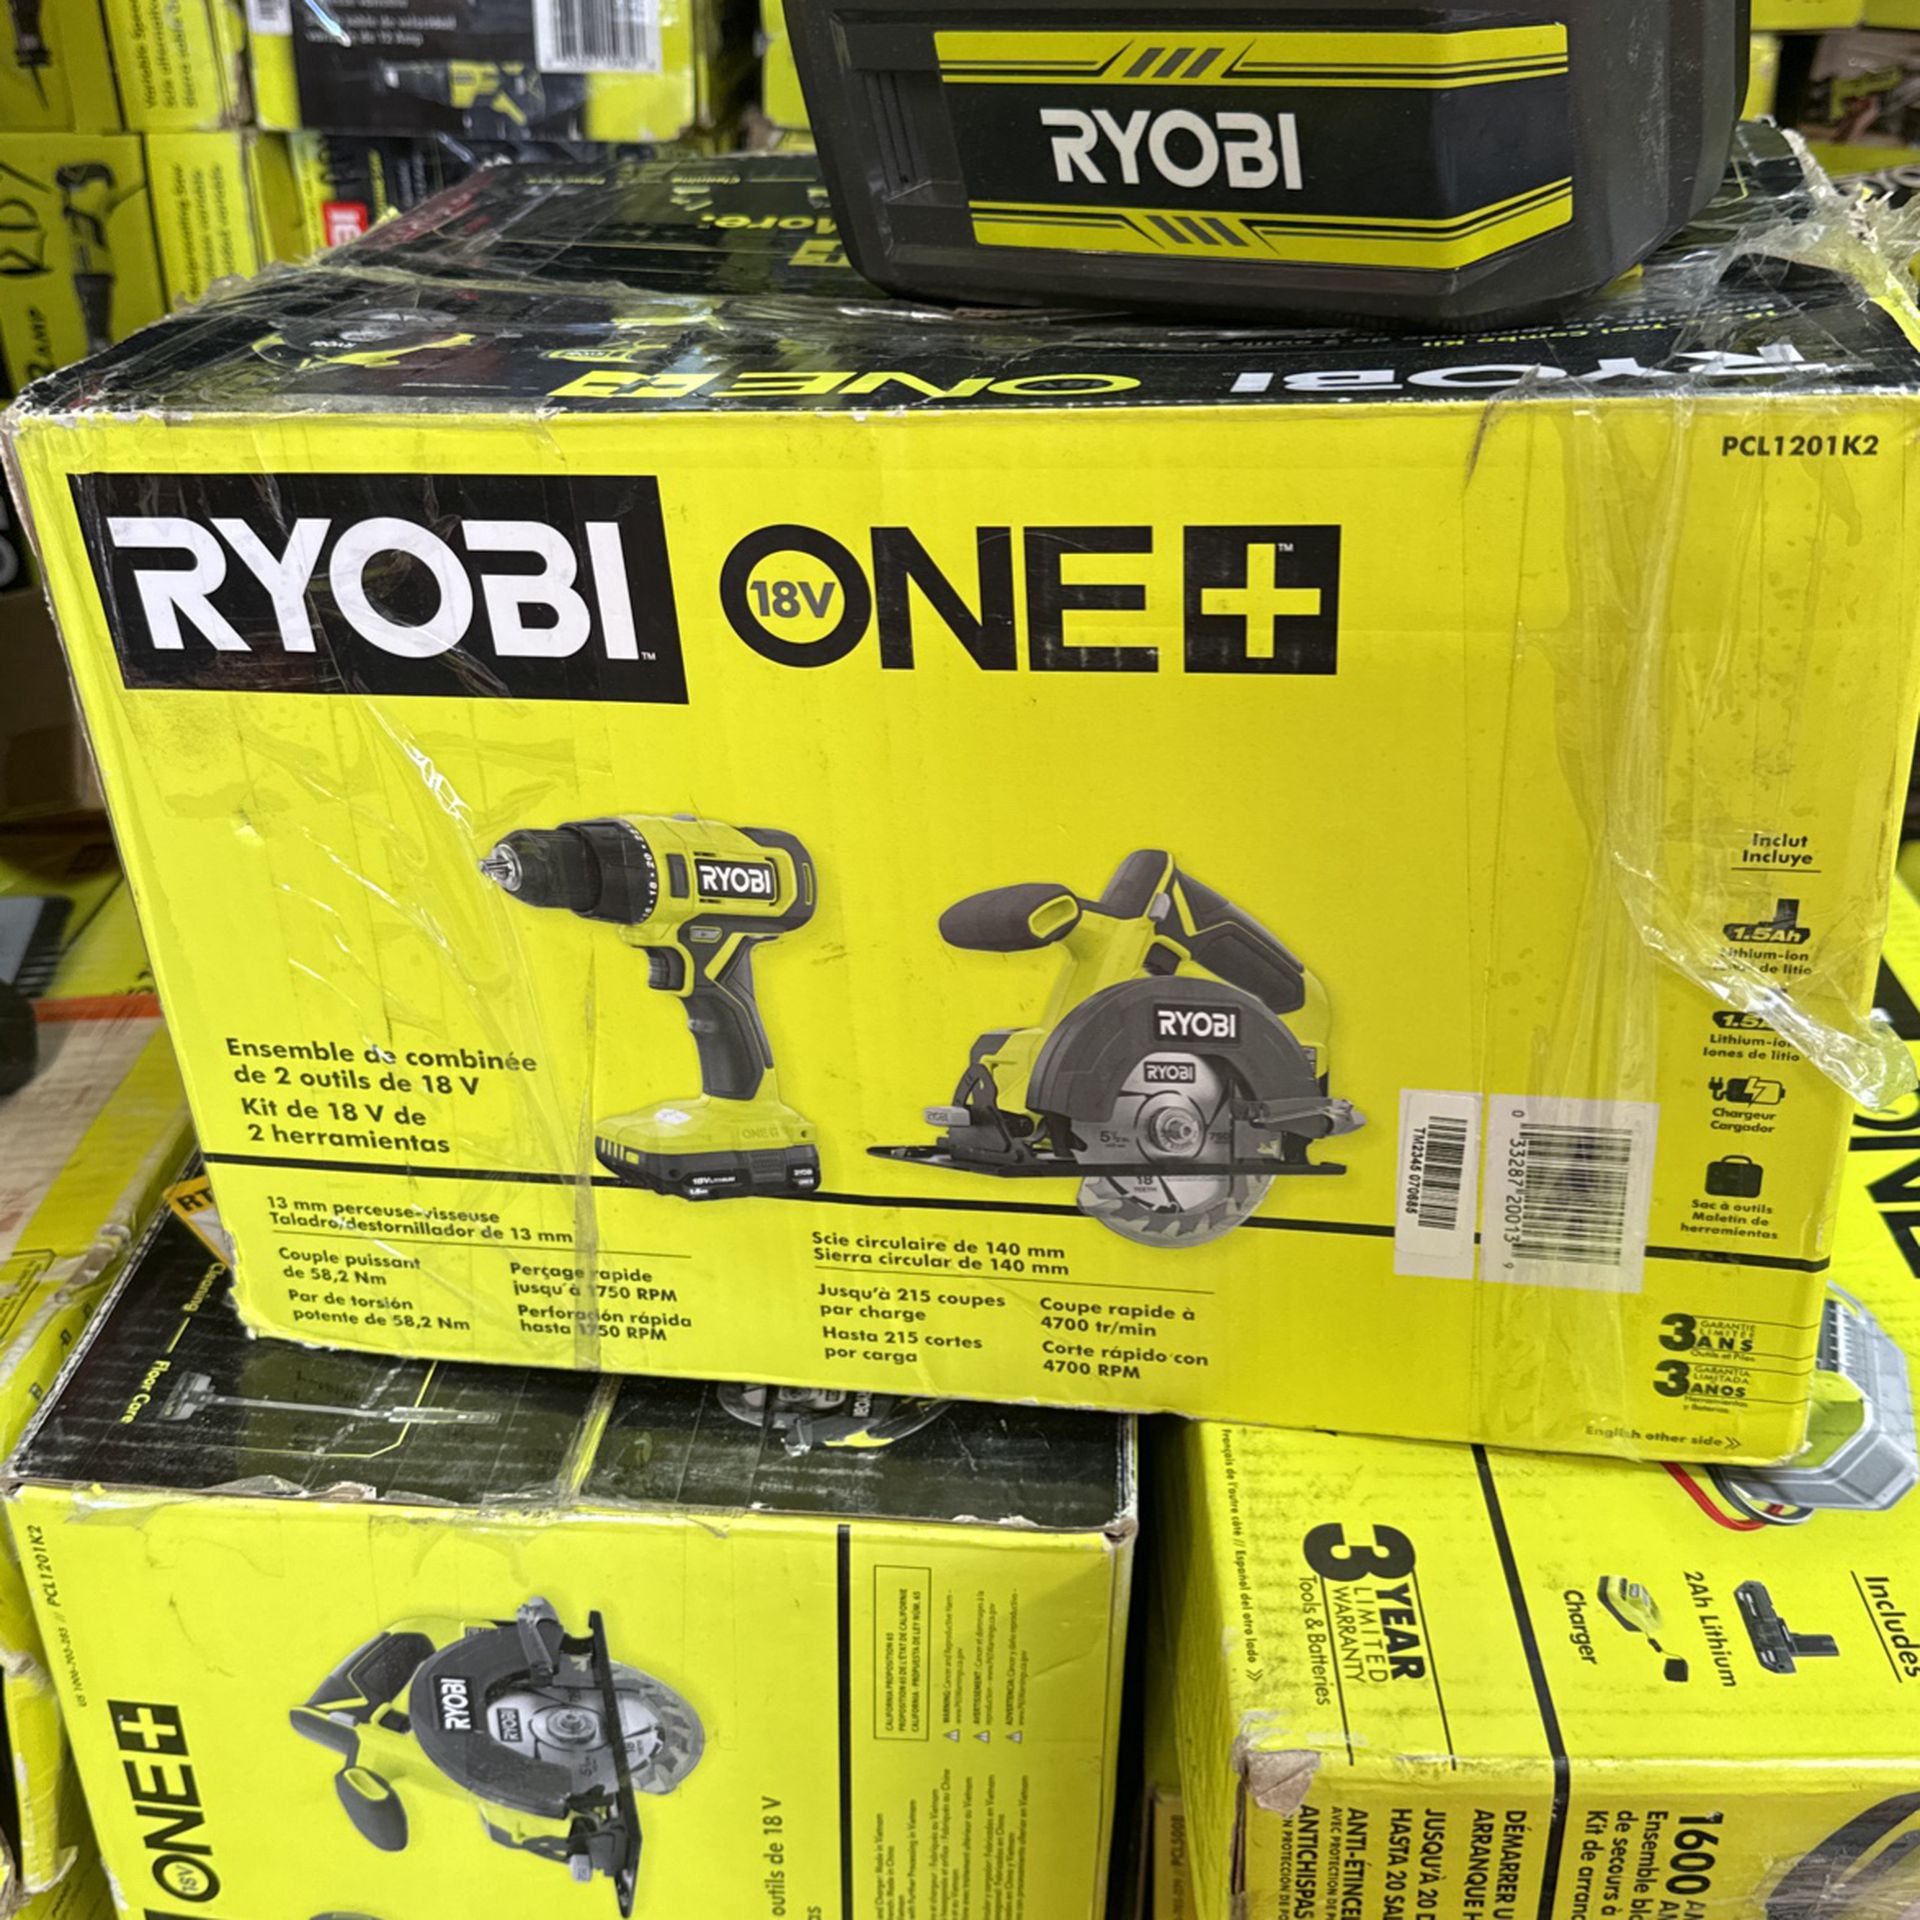 Ryobi 18v Combo Drill And Circular Saw With 2 Batteries And Charger 